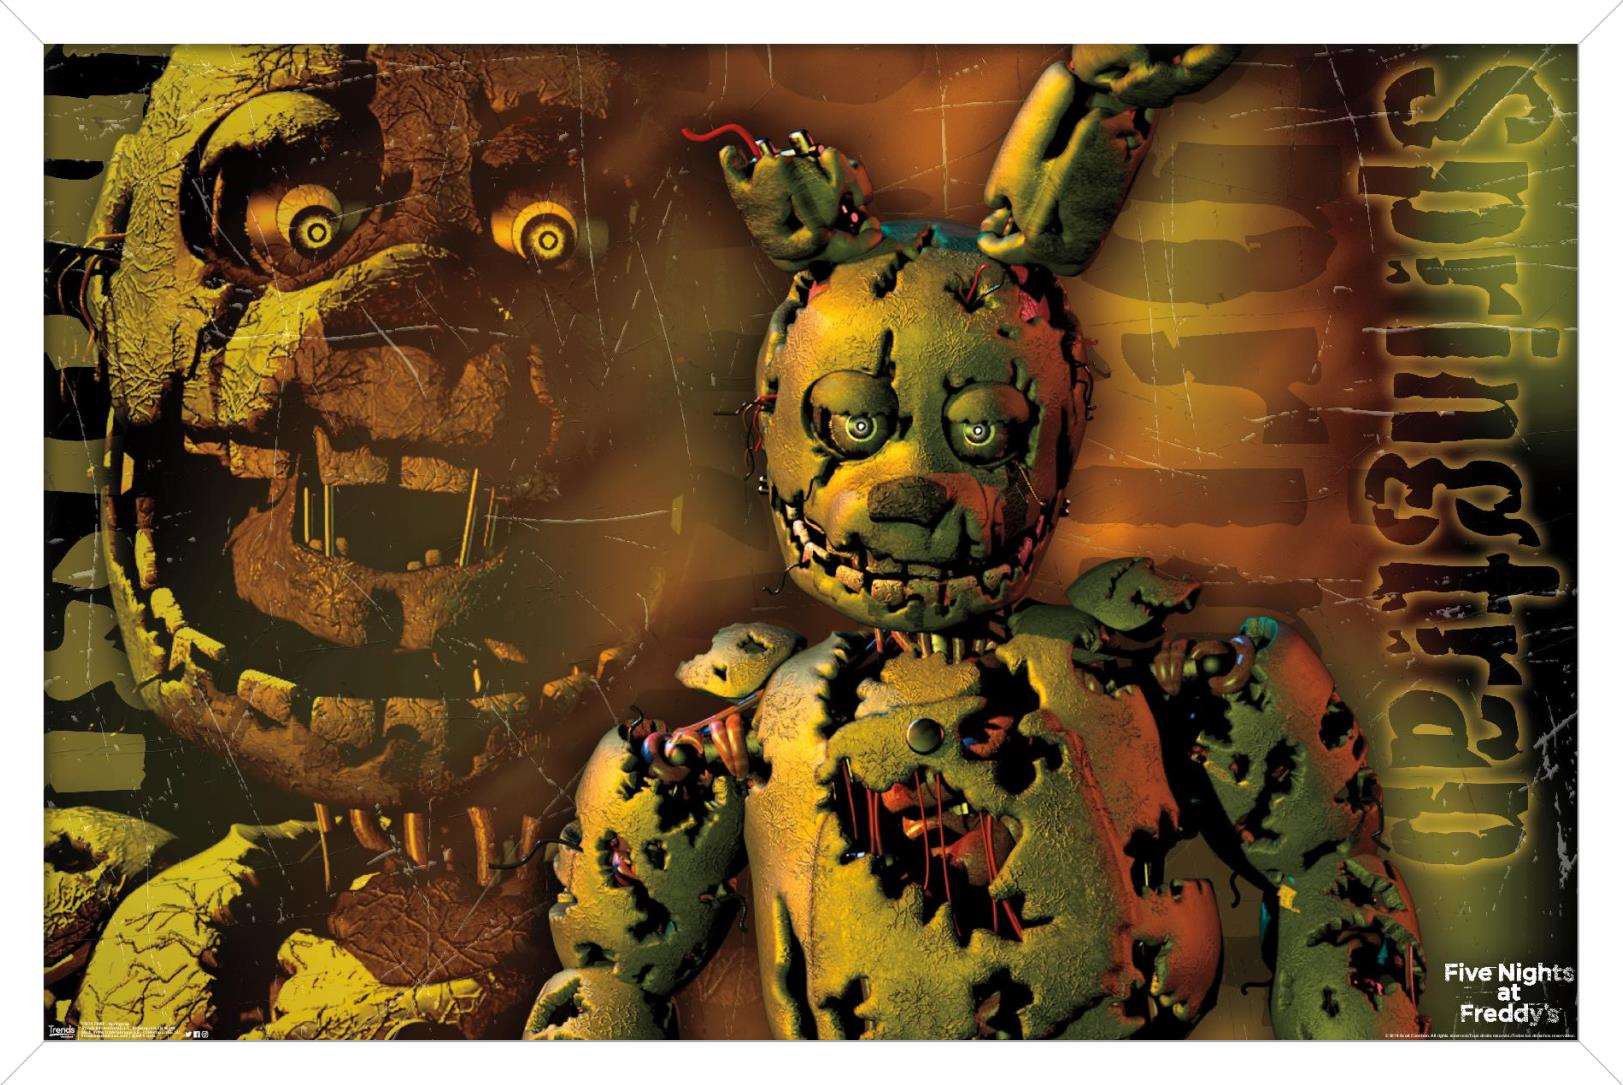 Five Nights at Freddy's - Springtrap Wall Poster, 14.725 x 22.375, Framed  